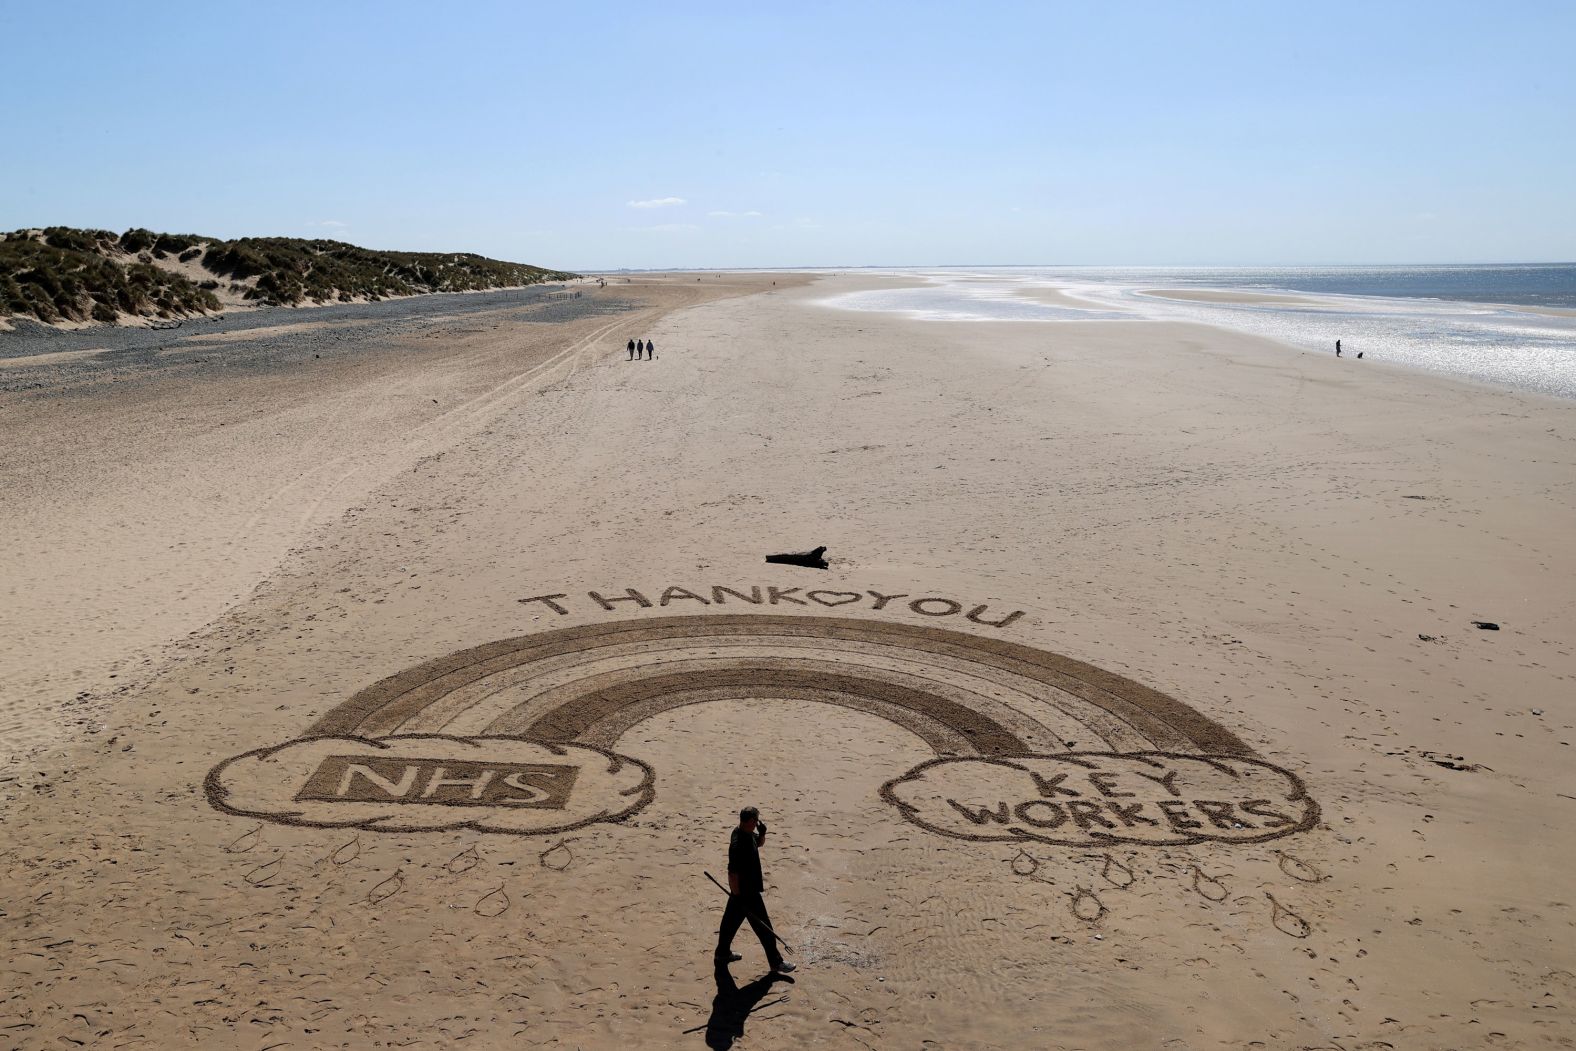 Ben from the Sandymental art team works on a sand drawing at Lytham St. Annes, a seaside resort in London, on April 20.